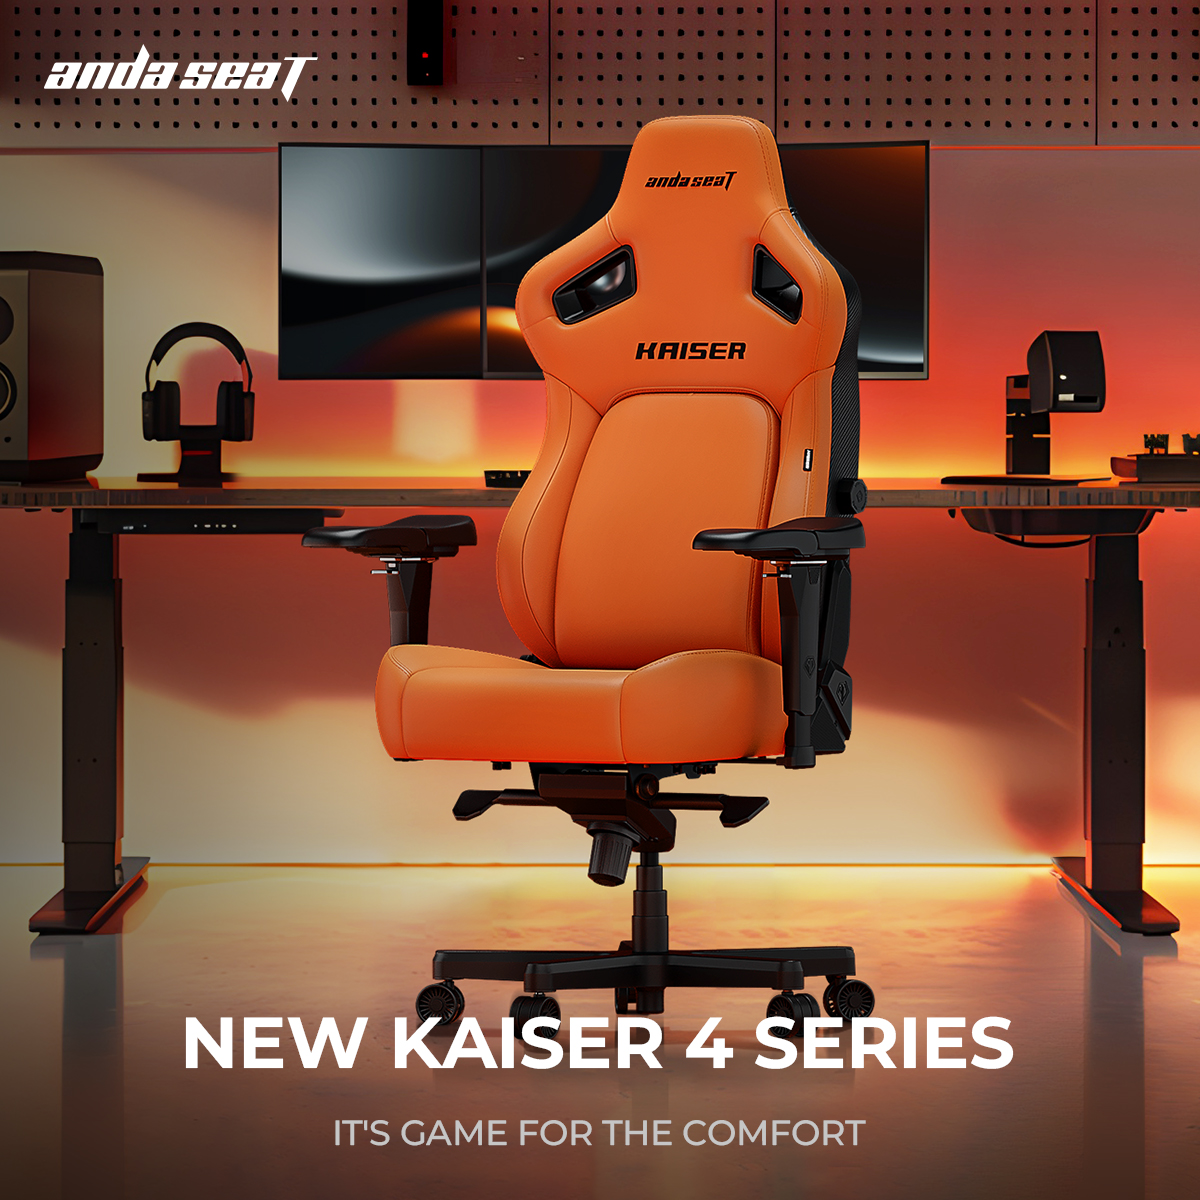 🍾Kickoos! Only two weeks to go! Don’t miss out on the MSI deal, and get yourself an Andaseat to enjoy the gaming tournament in total comfort. Explore Now: shorturl.at/fCF57 #andaseat #kaiser4 #homeandaseat #gamingchair #gaming #gamingsetup #explore #fyp #sale